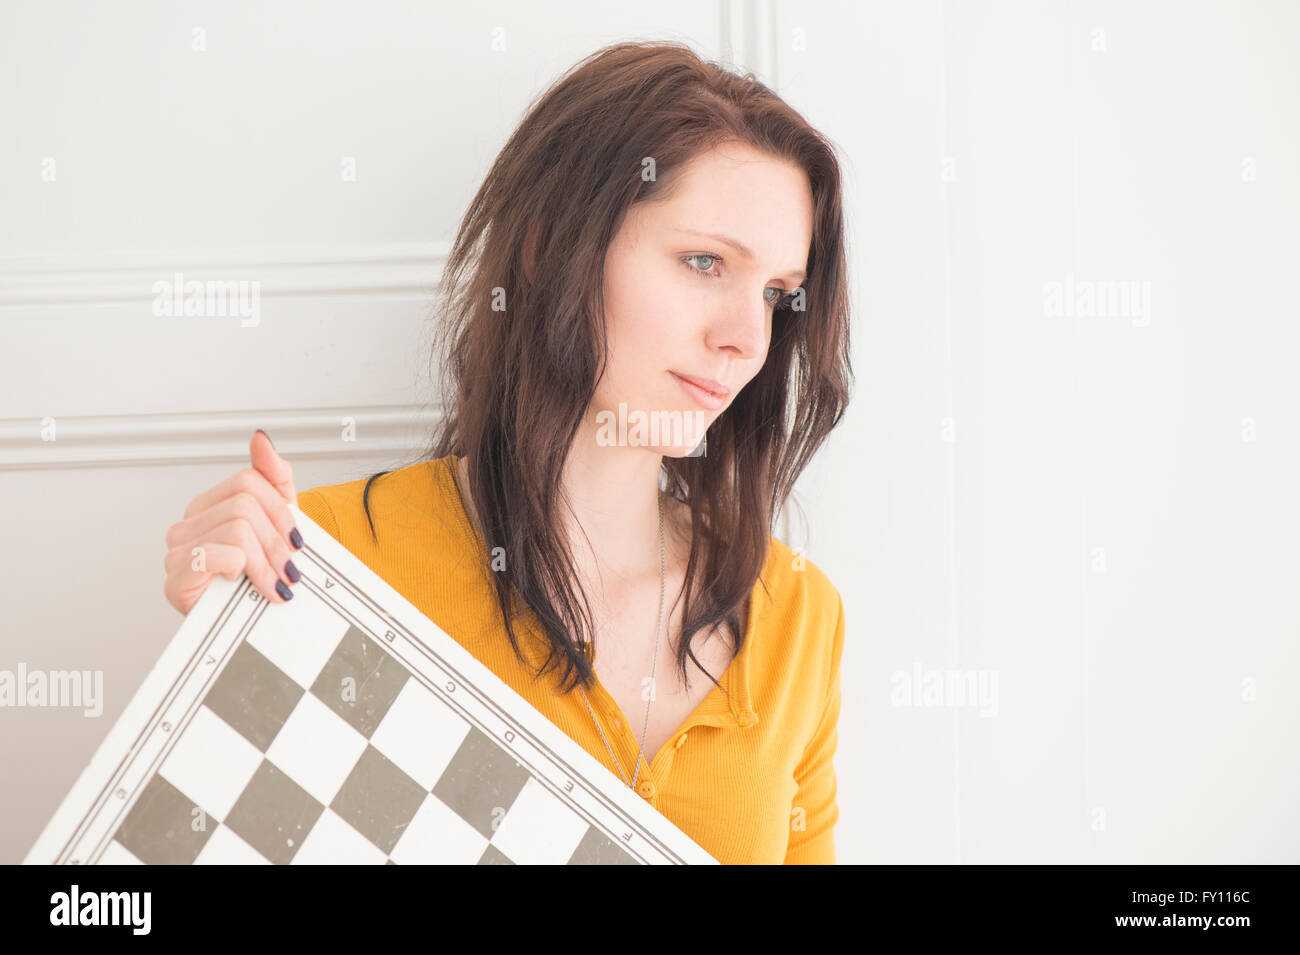 Serious woman holding chessboard in home interior. Concept of strategy, leisure activity and contemplation. Stock Photo